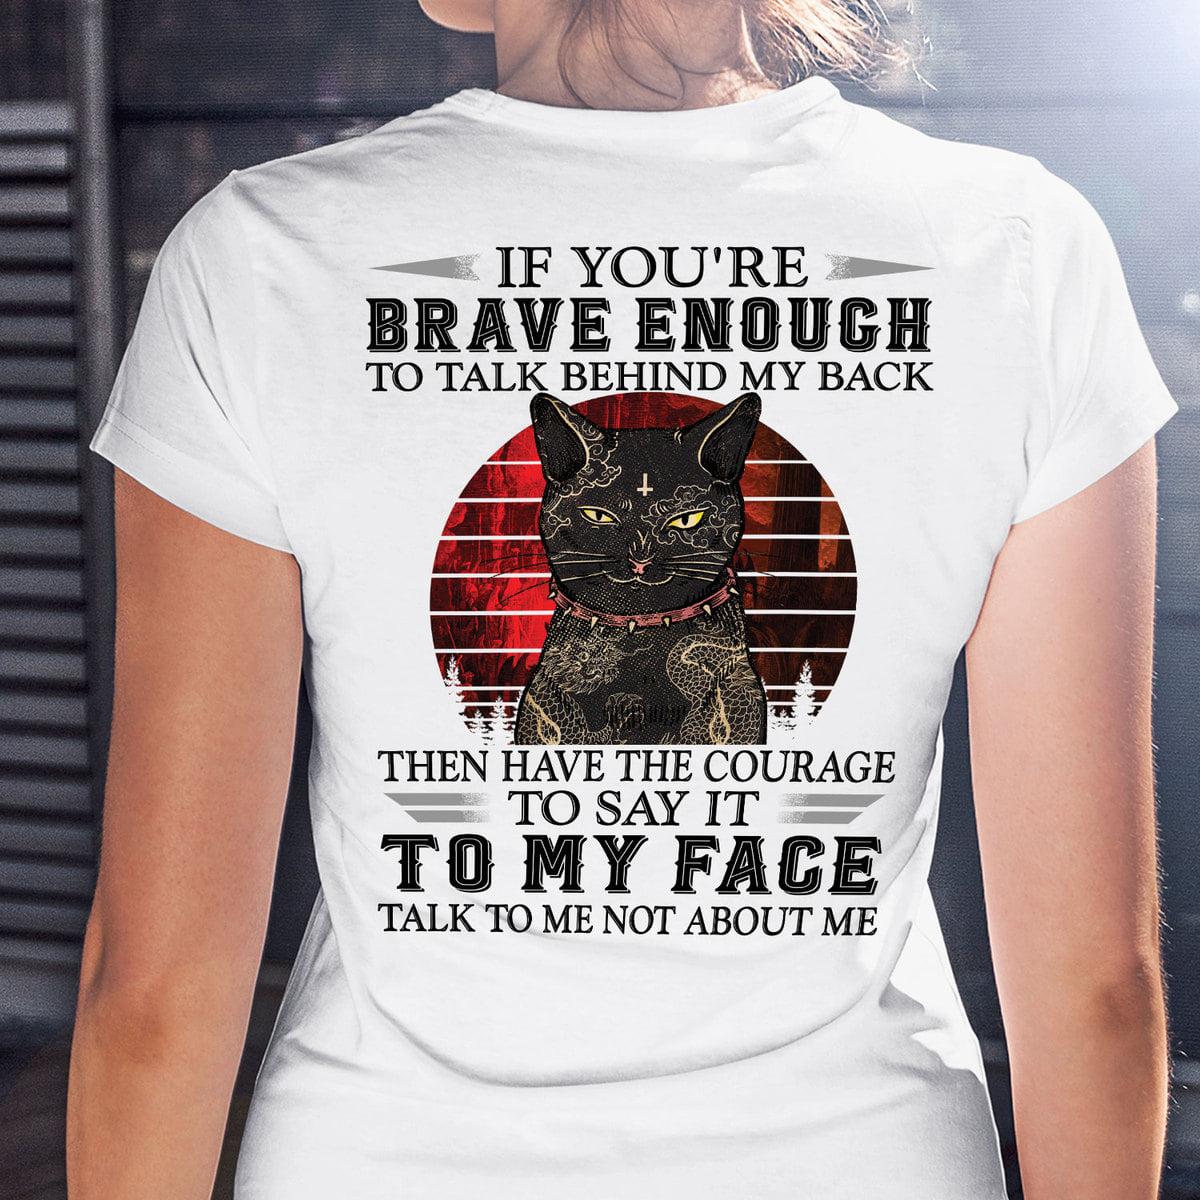 Tattoo Black Cat - If you're brave enough to talk behind my back then have the courage to say it to my face talk to me not about me